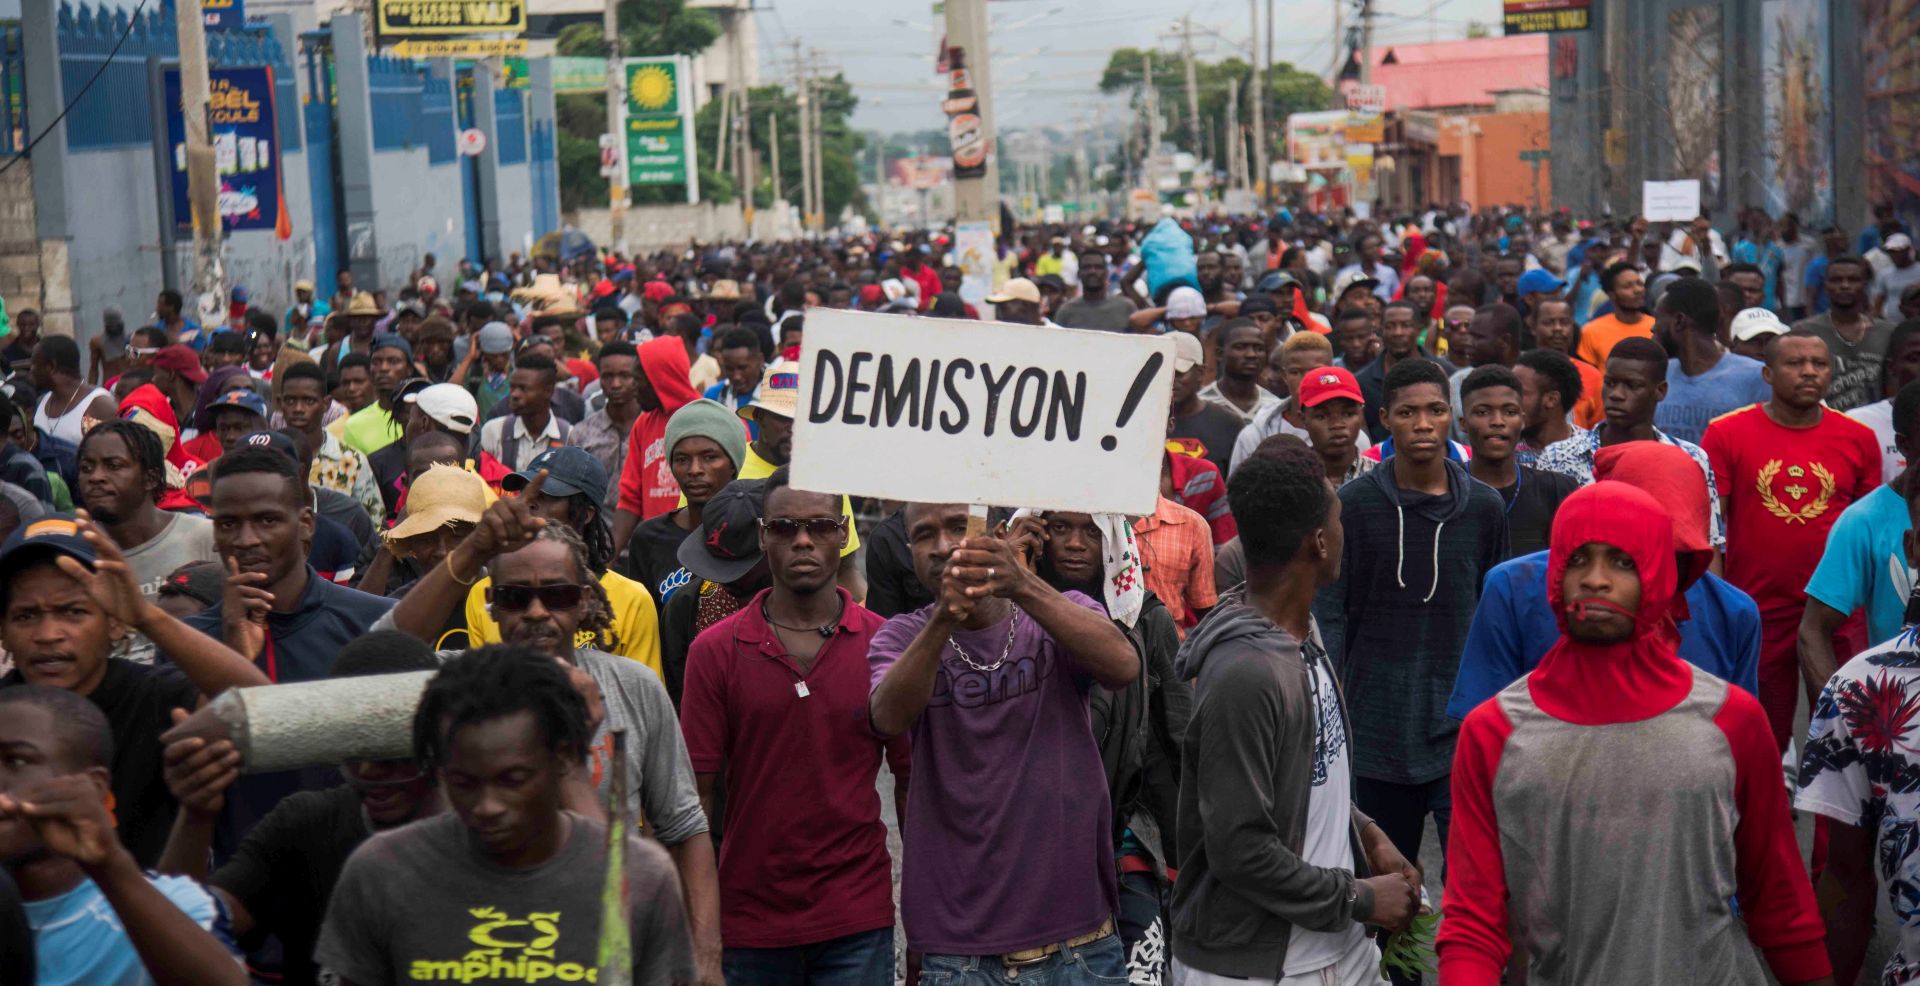 epa07857902 People participate during protests held to request the resignation of President of Haiti Jovenel Moise, in Port-au-Prince, Haiti, 20 September 2019. Haiti experienced a new day of protests over fuel shortages, which have persisted since  August. At least one person was killed during the day's protests.  EPA/JEAN MARC HERVE ABELARD